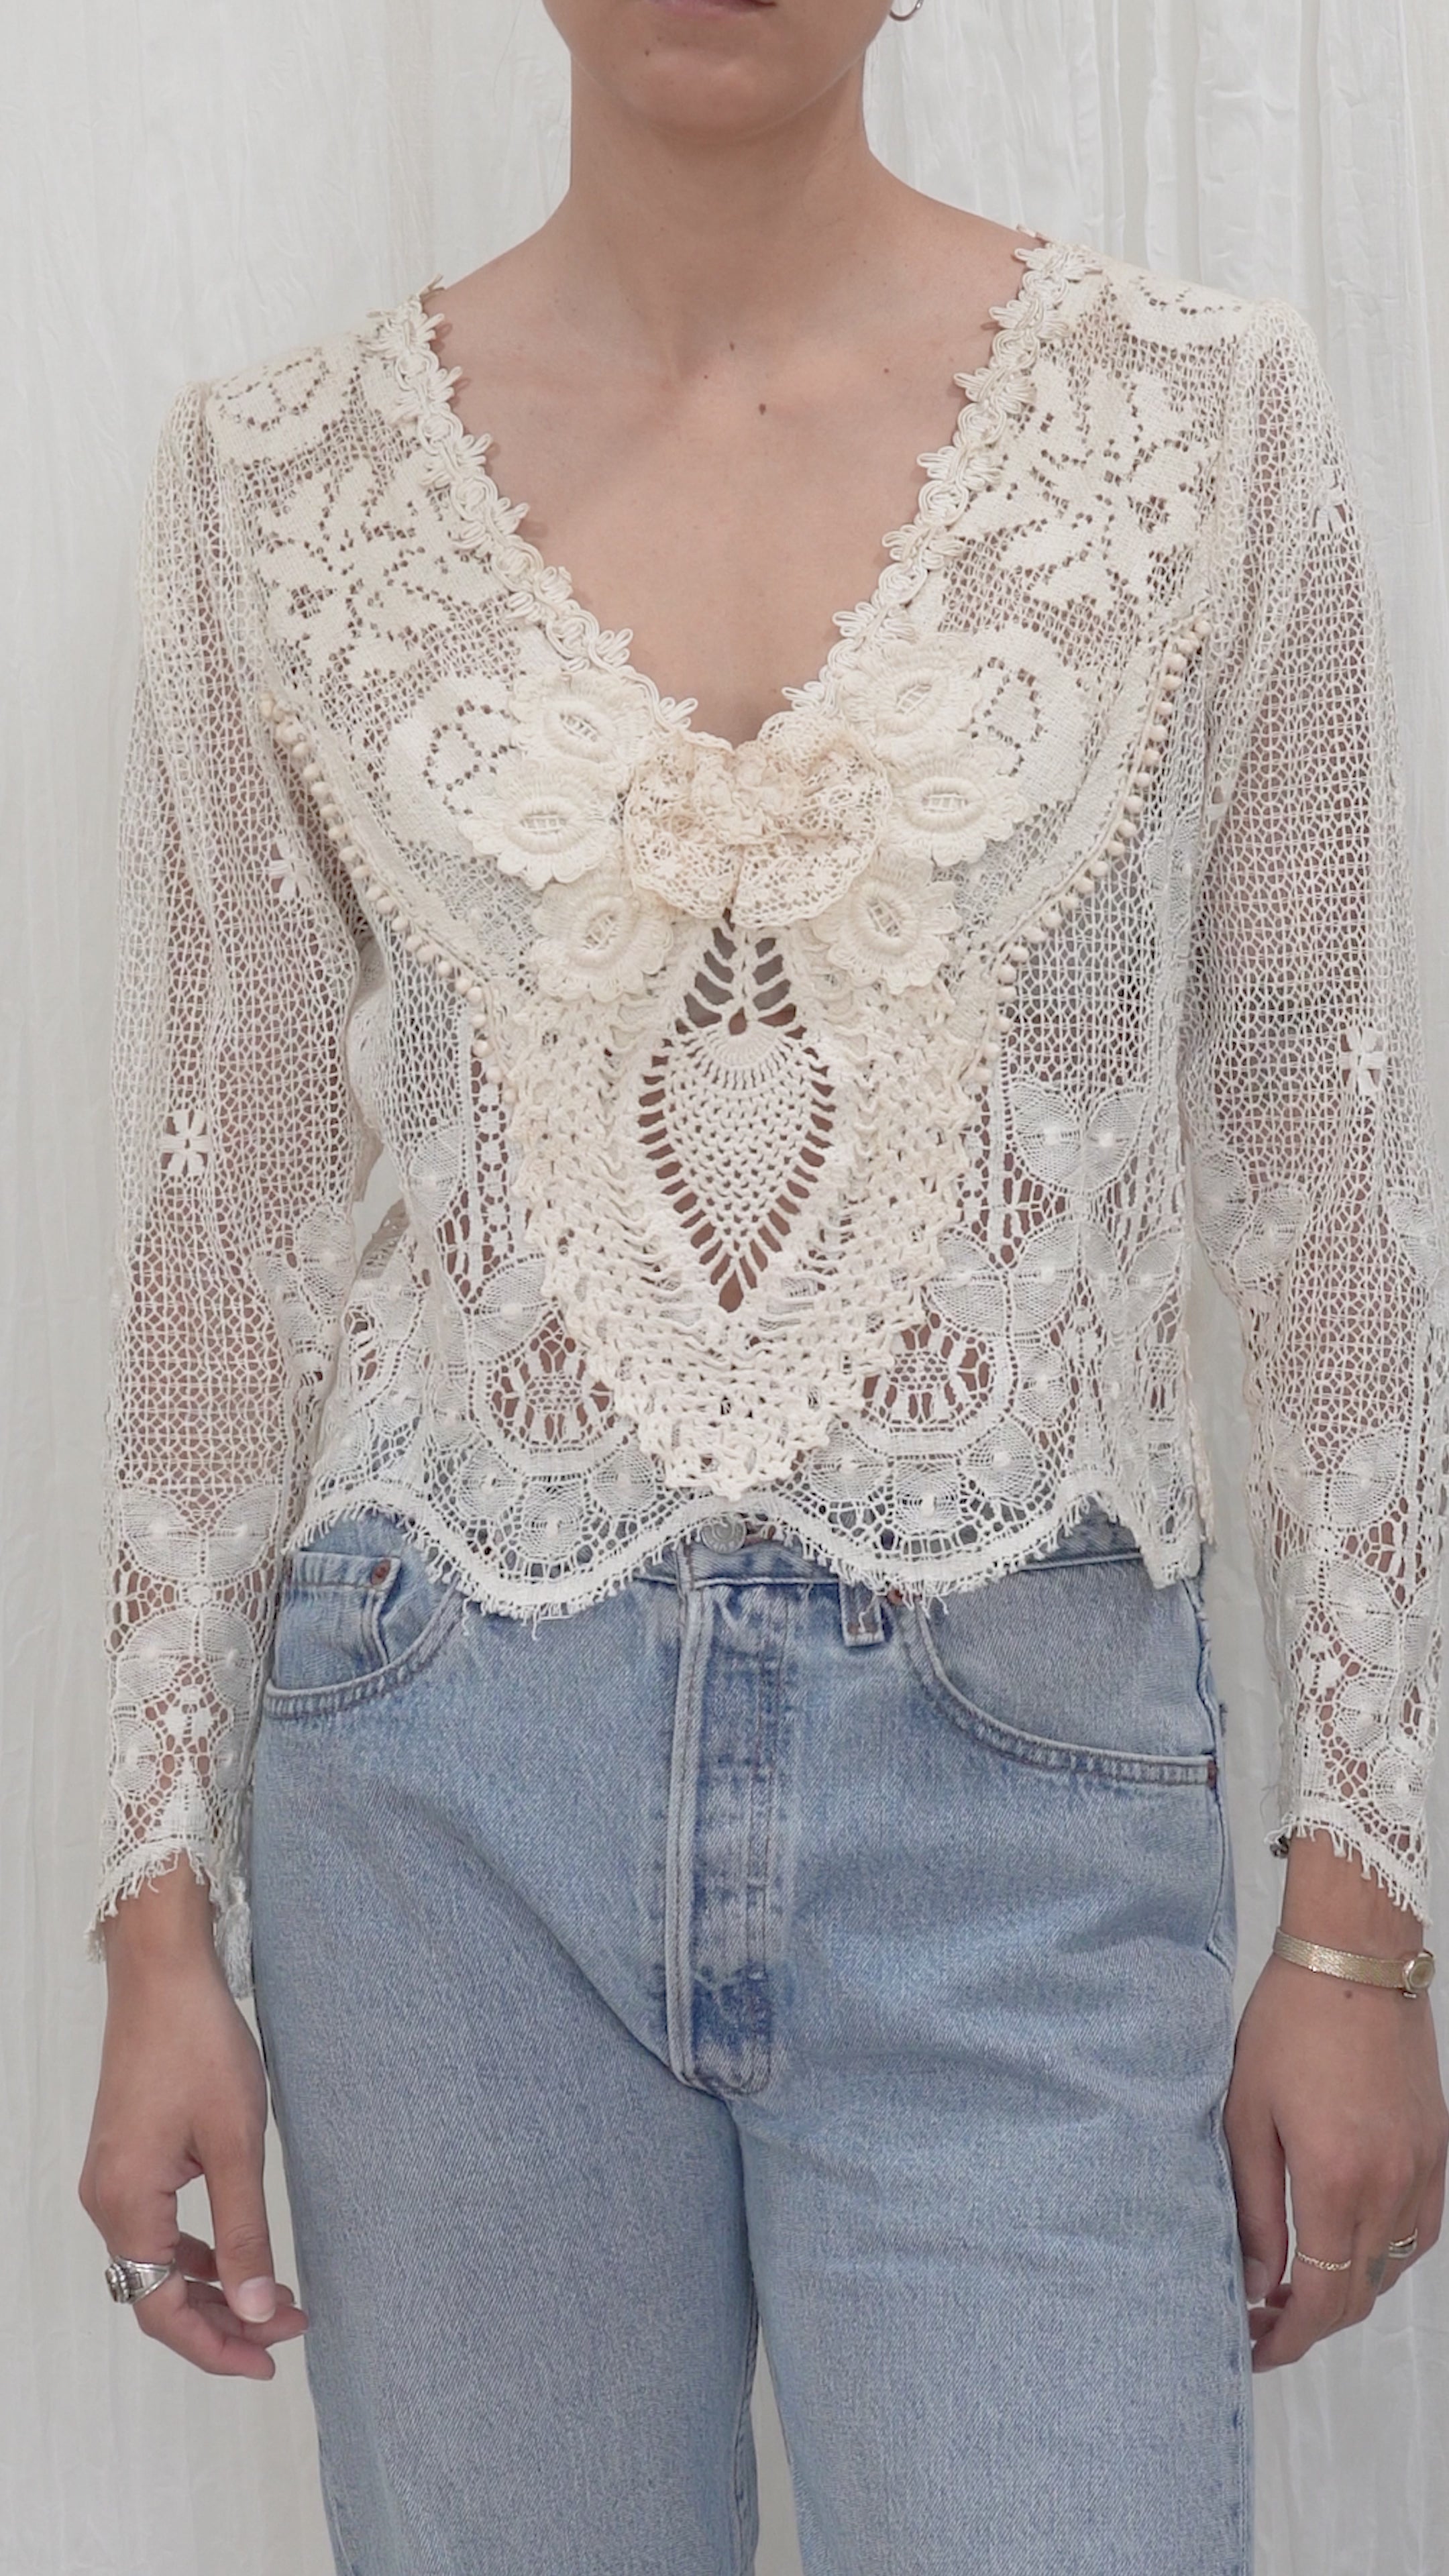 Antique Edwardian-Inspired Lace Top